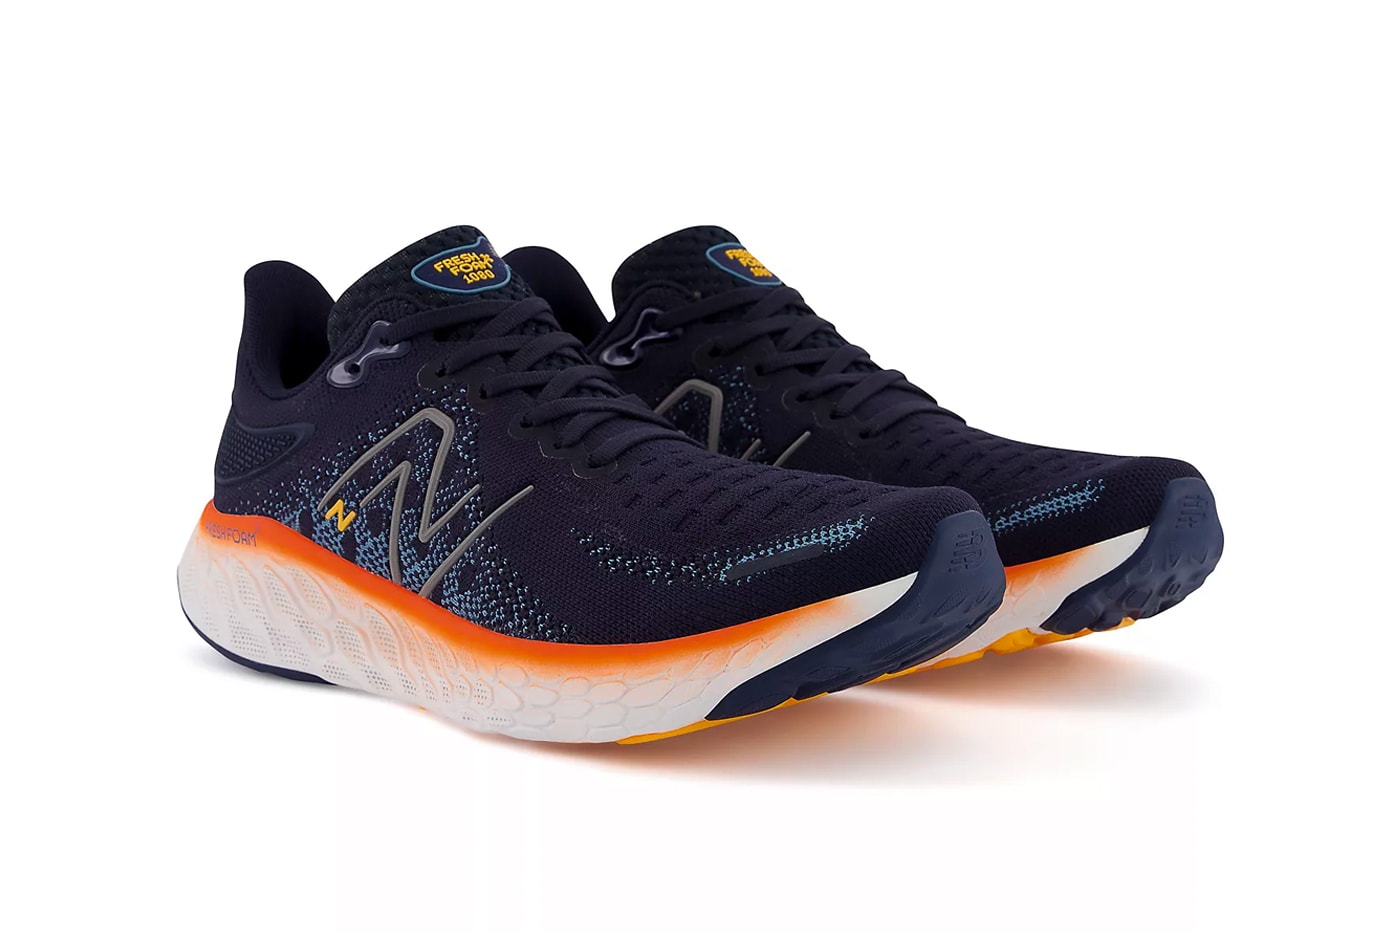 New Balance Fresh Foam X 1080v12 Best Running Shoes Right Now to Buy 2023